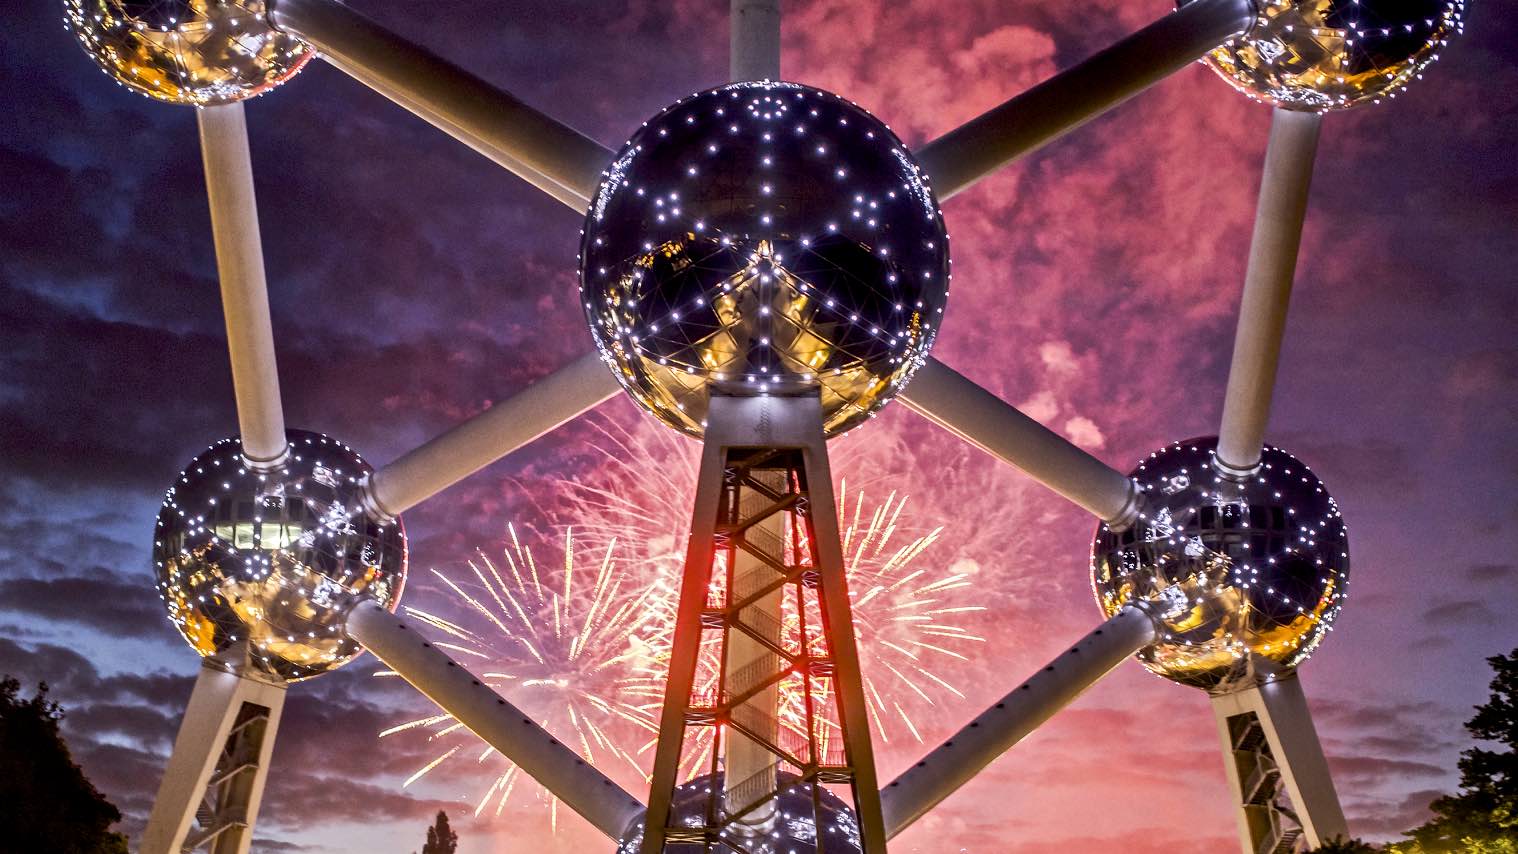 Join us for Live Stream Coverage of Brussels (Belgium) New Year's Eve Fireworks from Atomium